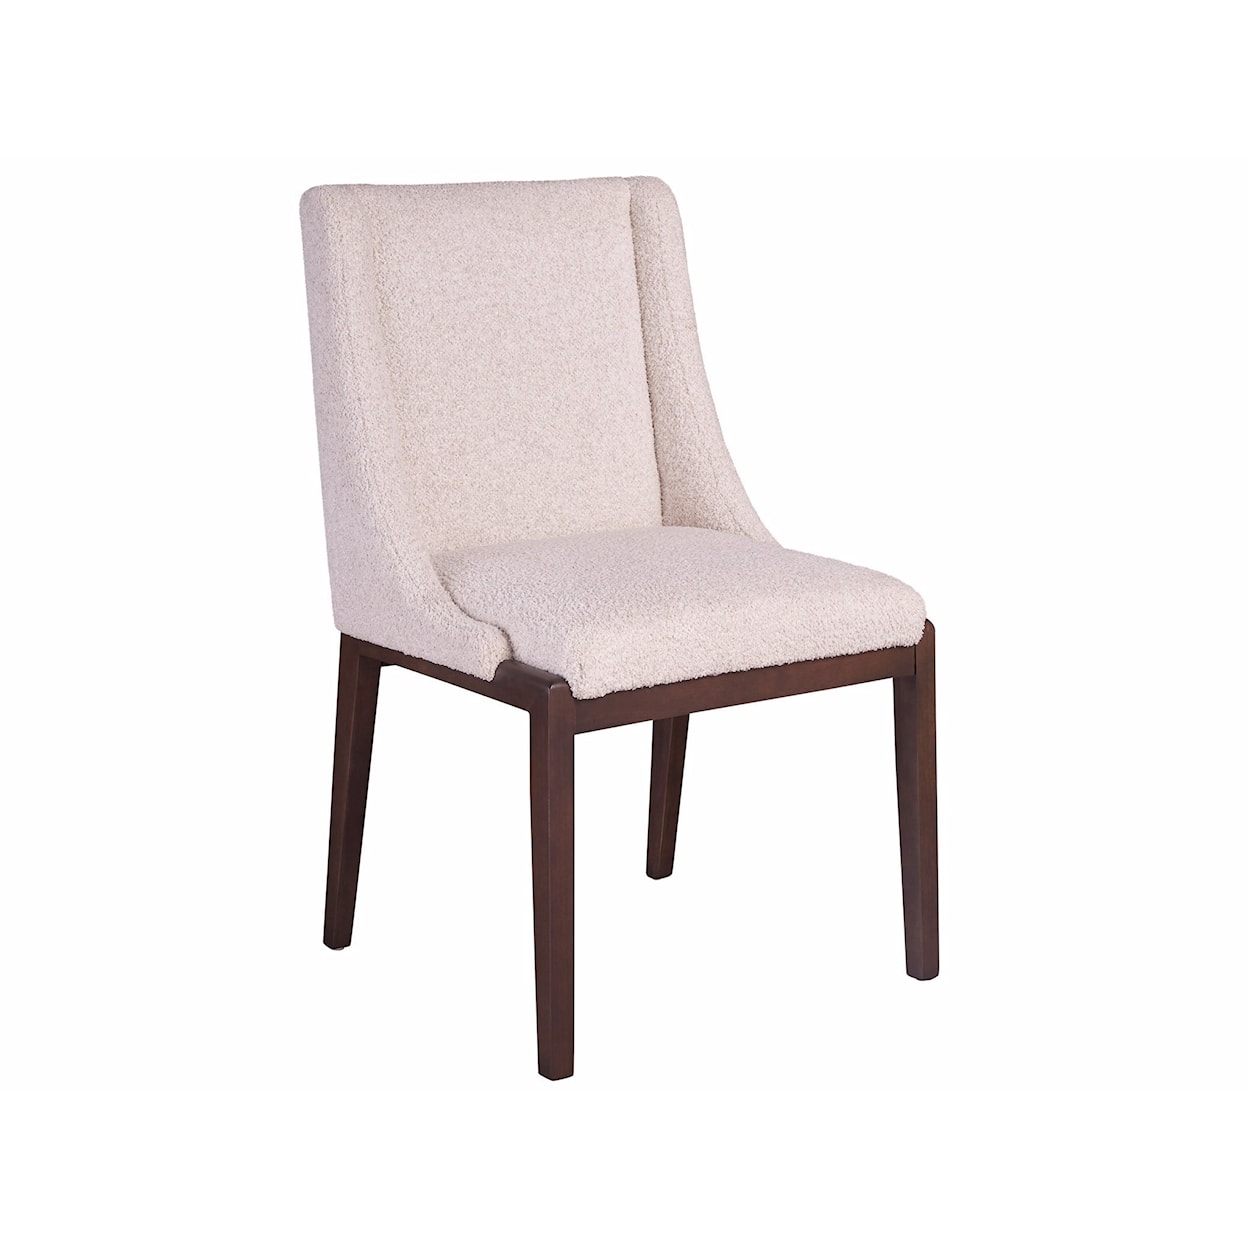 Universal Special Order Kilian Dining Chair - Special Order